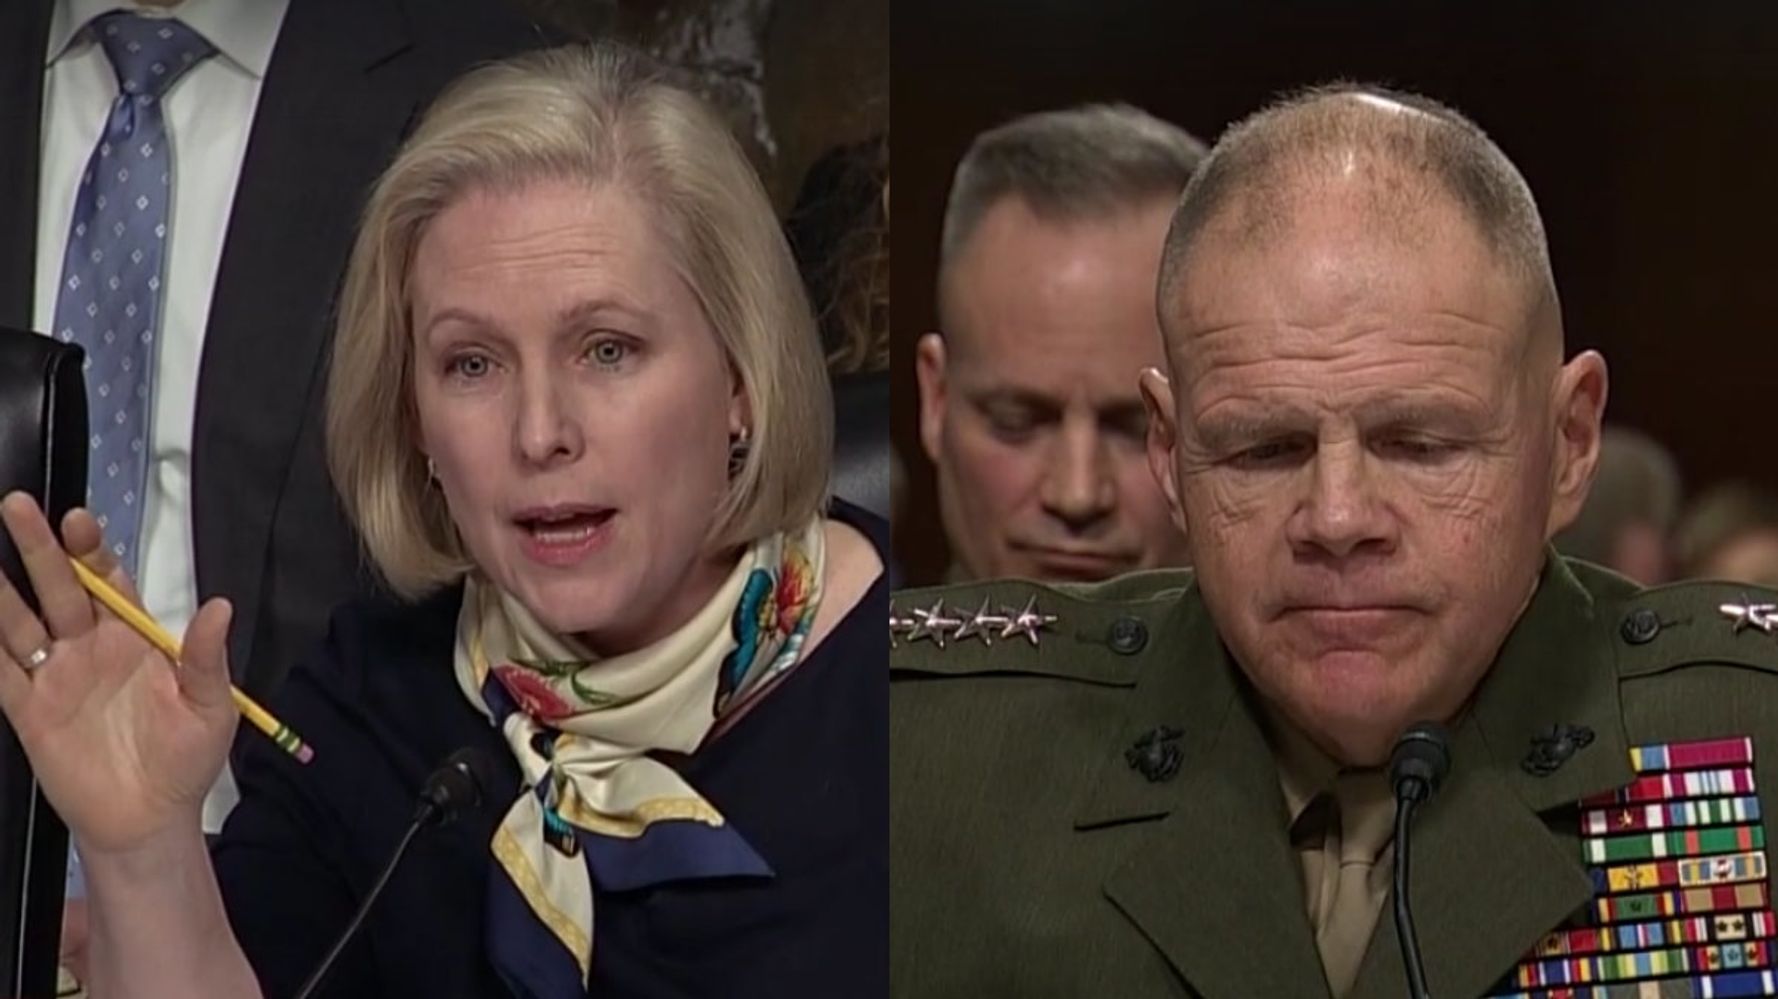 Watch Kirsten Gillibrand Tear Into Marine General About Nude Photo Scandal.